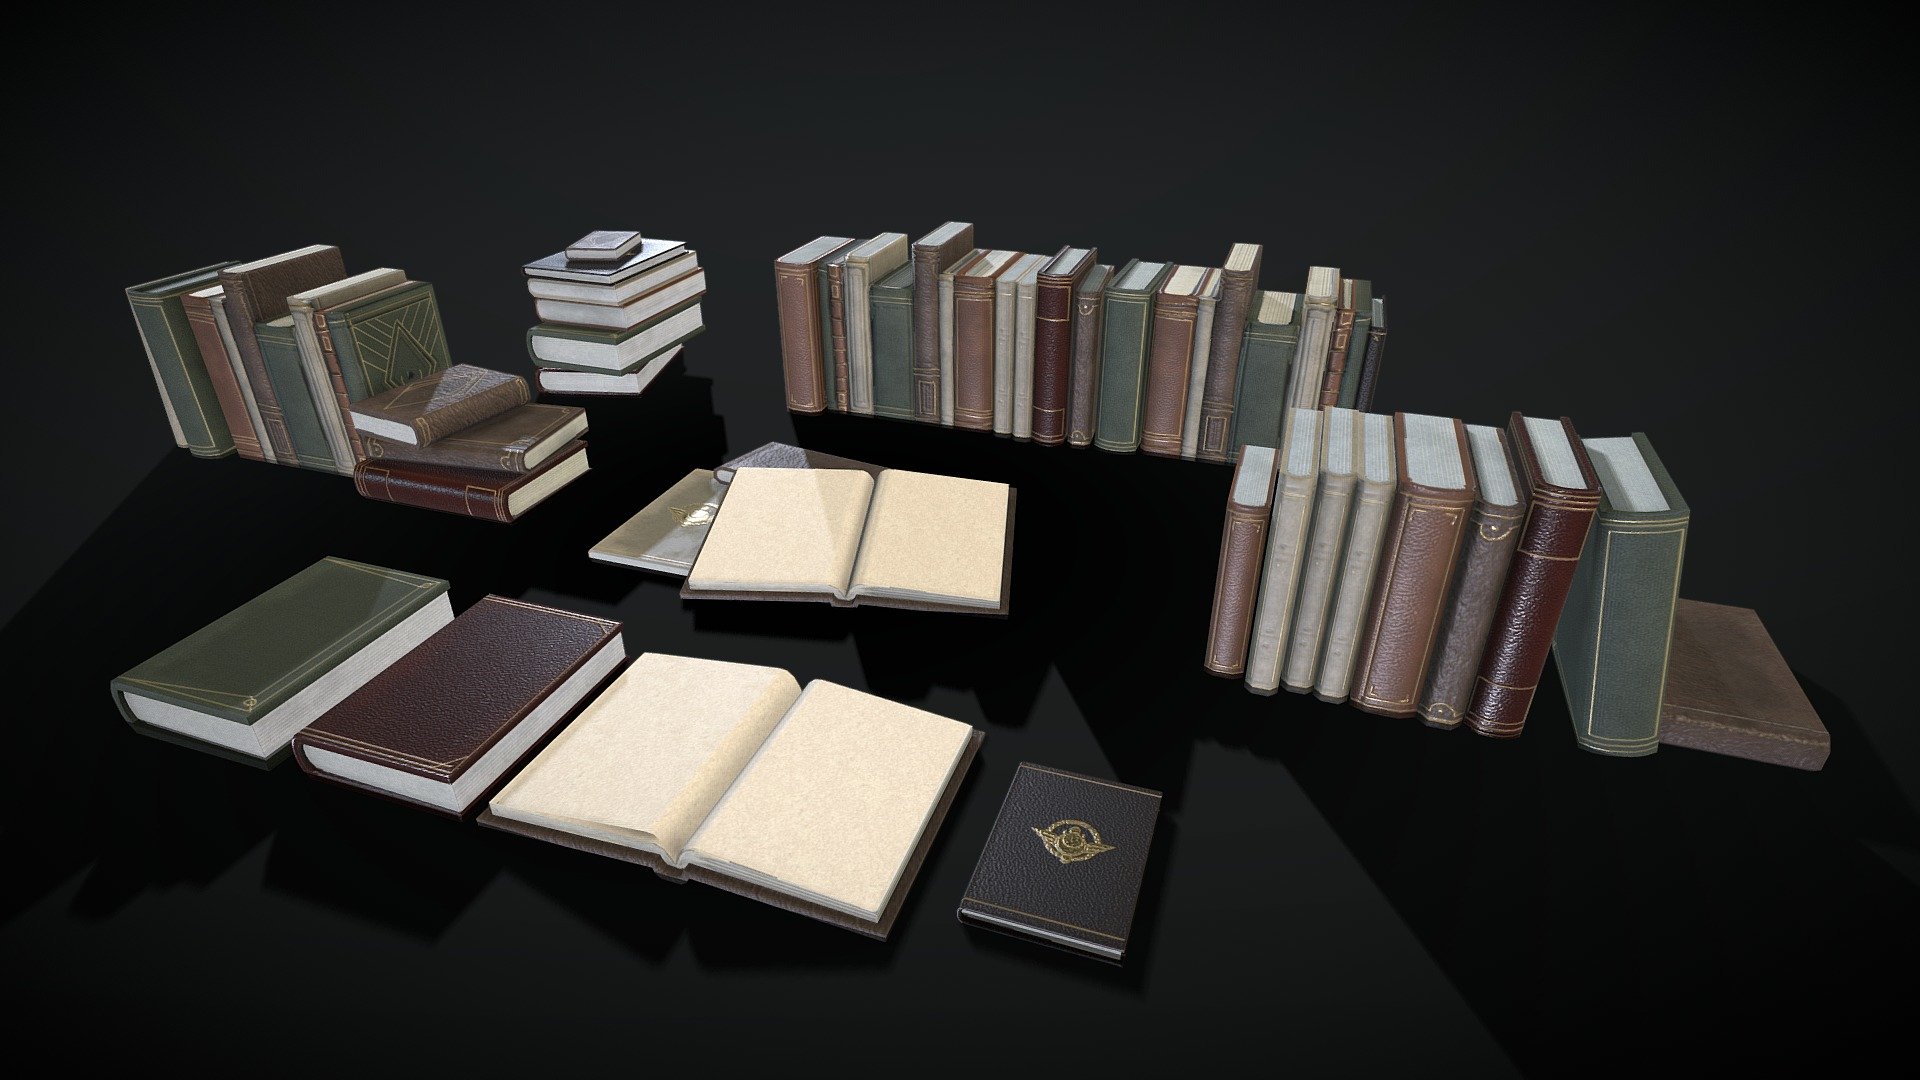 Support me on Patreon: https://www.patreon.com/feivelynart

a couple of books for setdressing

Made in part with Autodesk educational software, no commercial use allowed - Vintage Books - Download Free 3D model by Feivelyn 3d model